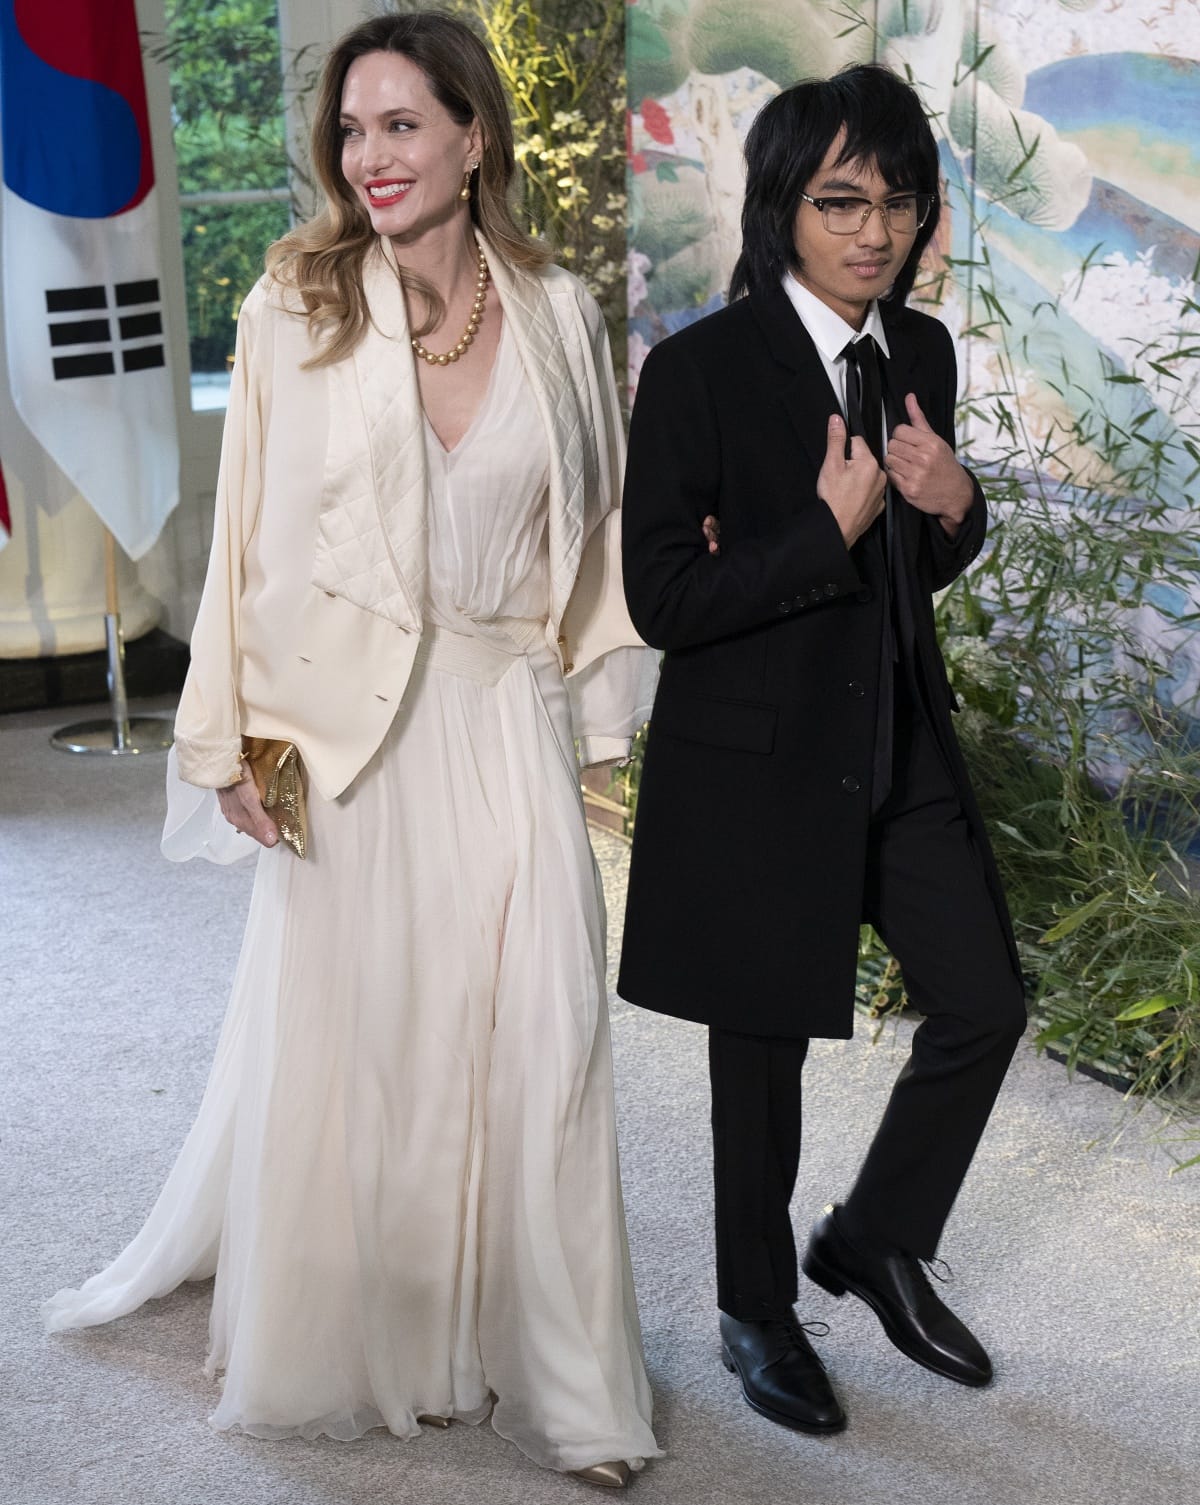 Angelina Jolie in a Chanel quilted jacket over an ivory dress and Maddox Jolie-Pitt in a classic black suit